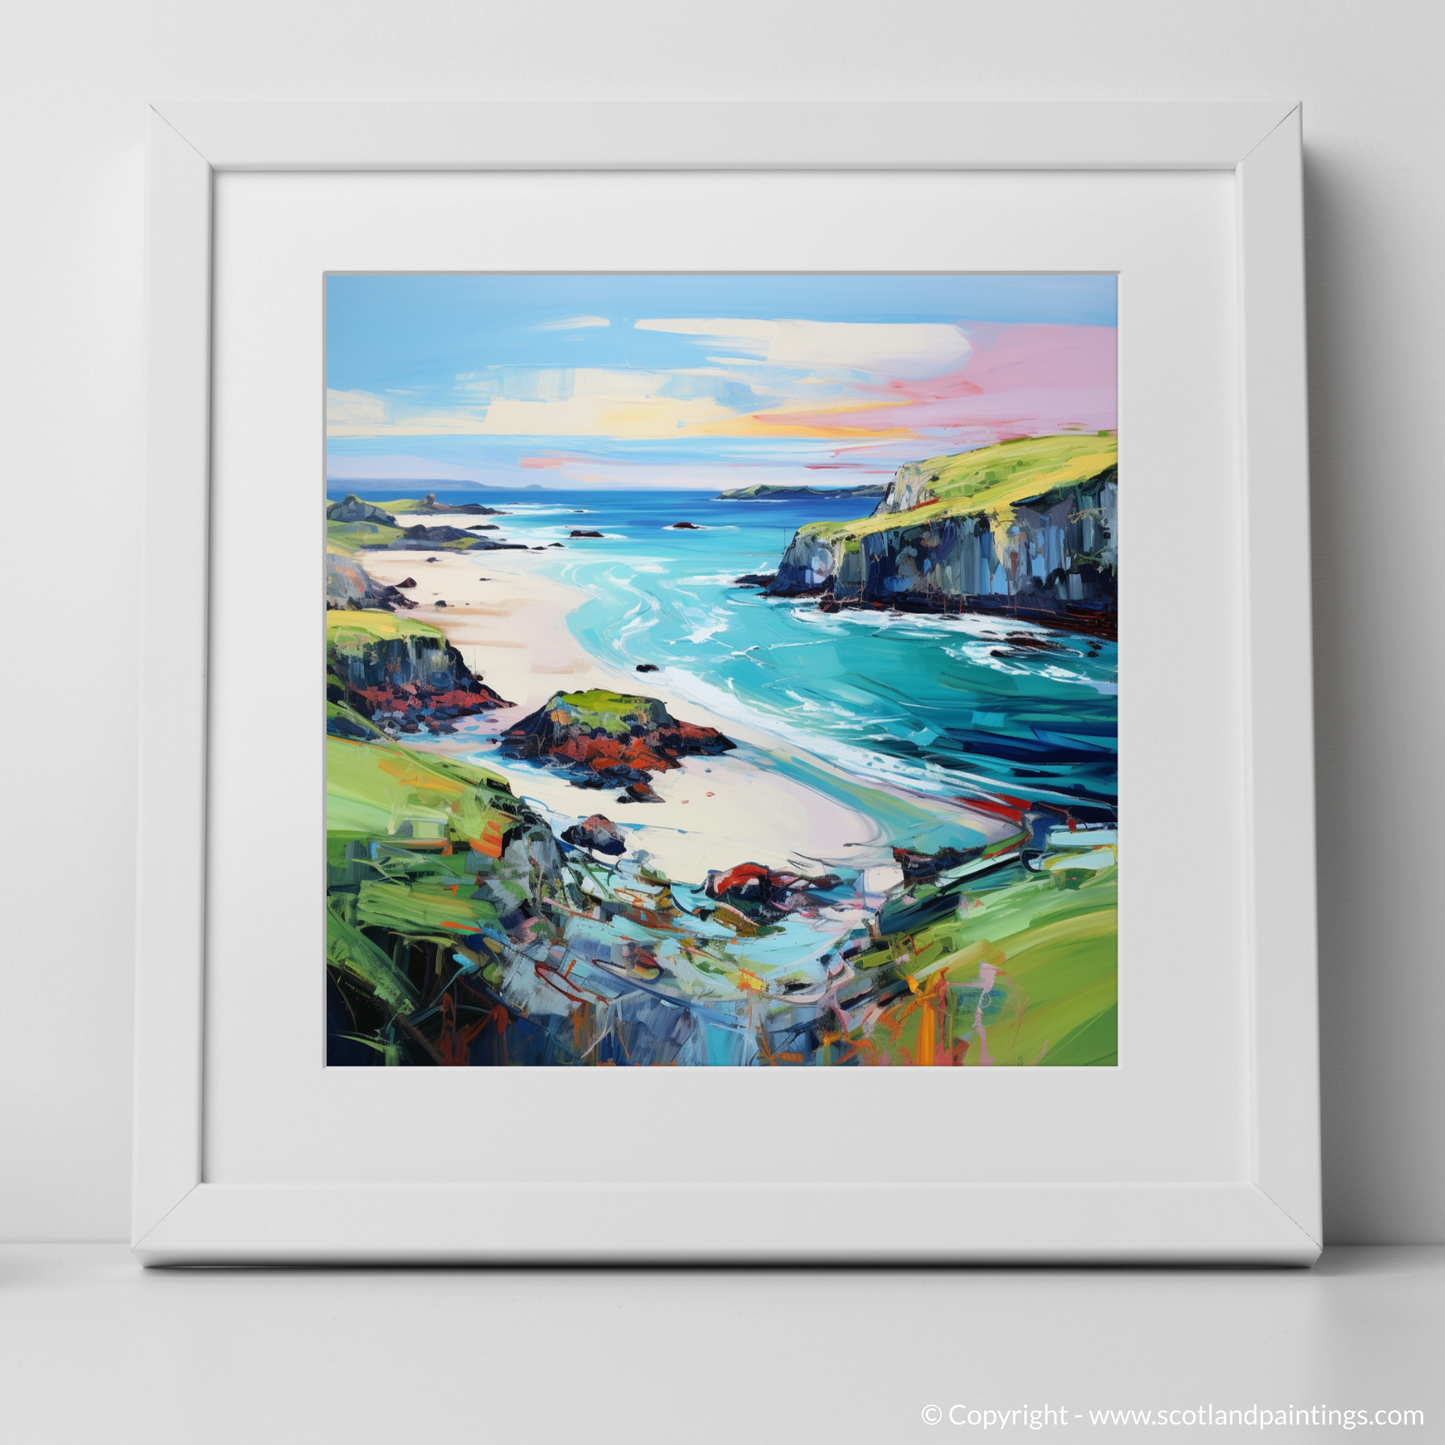 Art Print of Kiloran Bay, Isle of Colonsay with a white frame